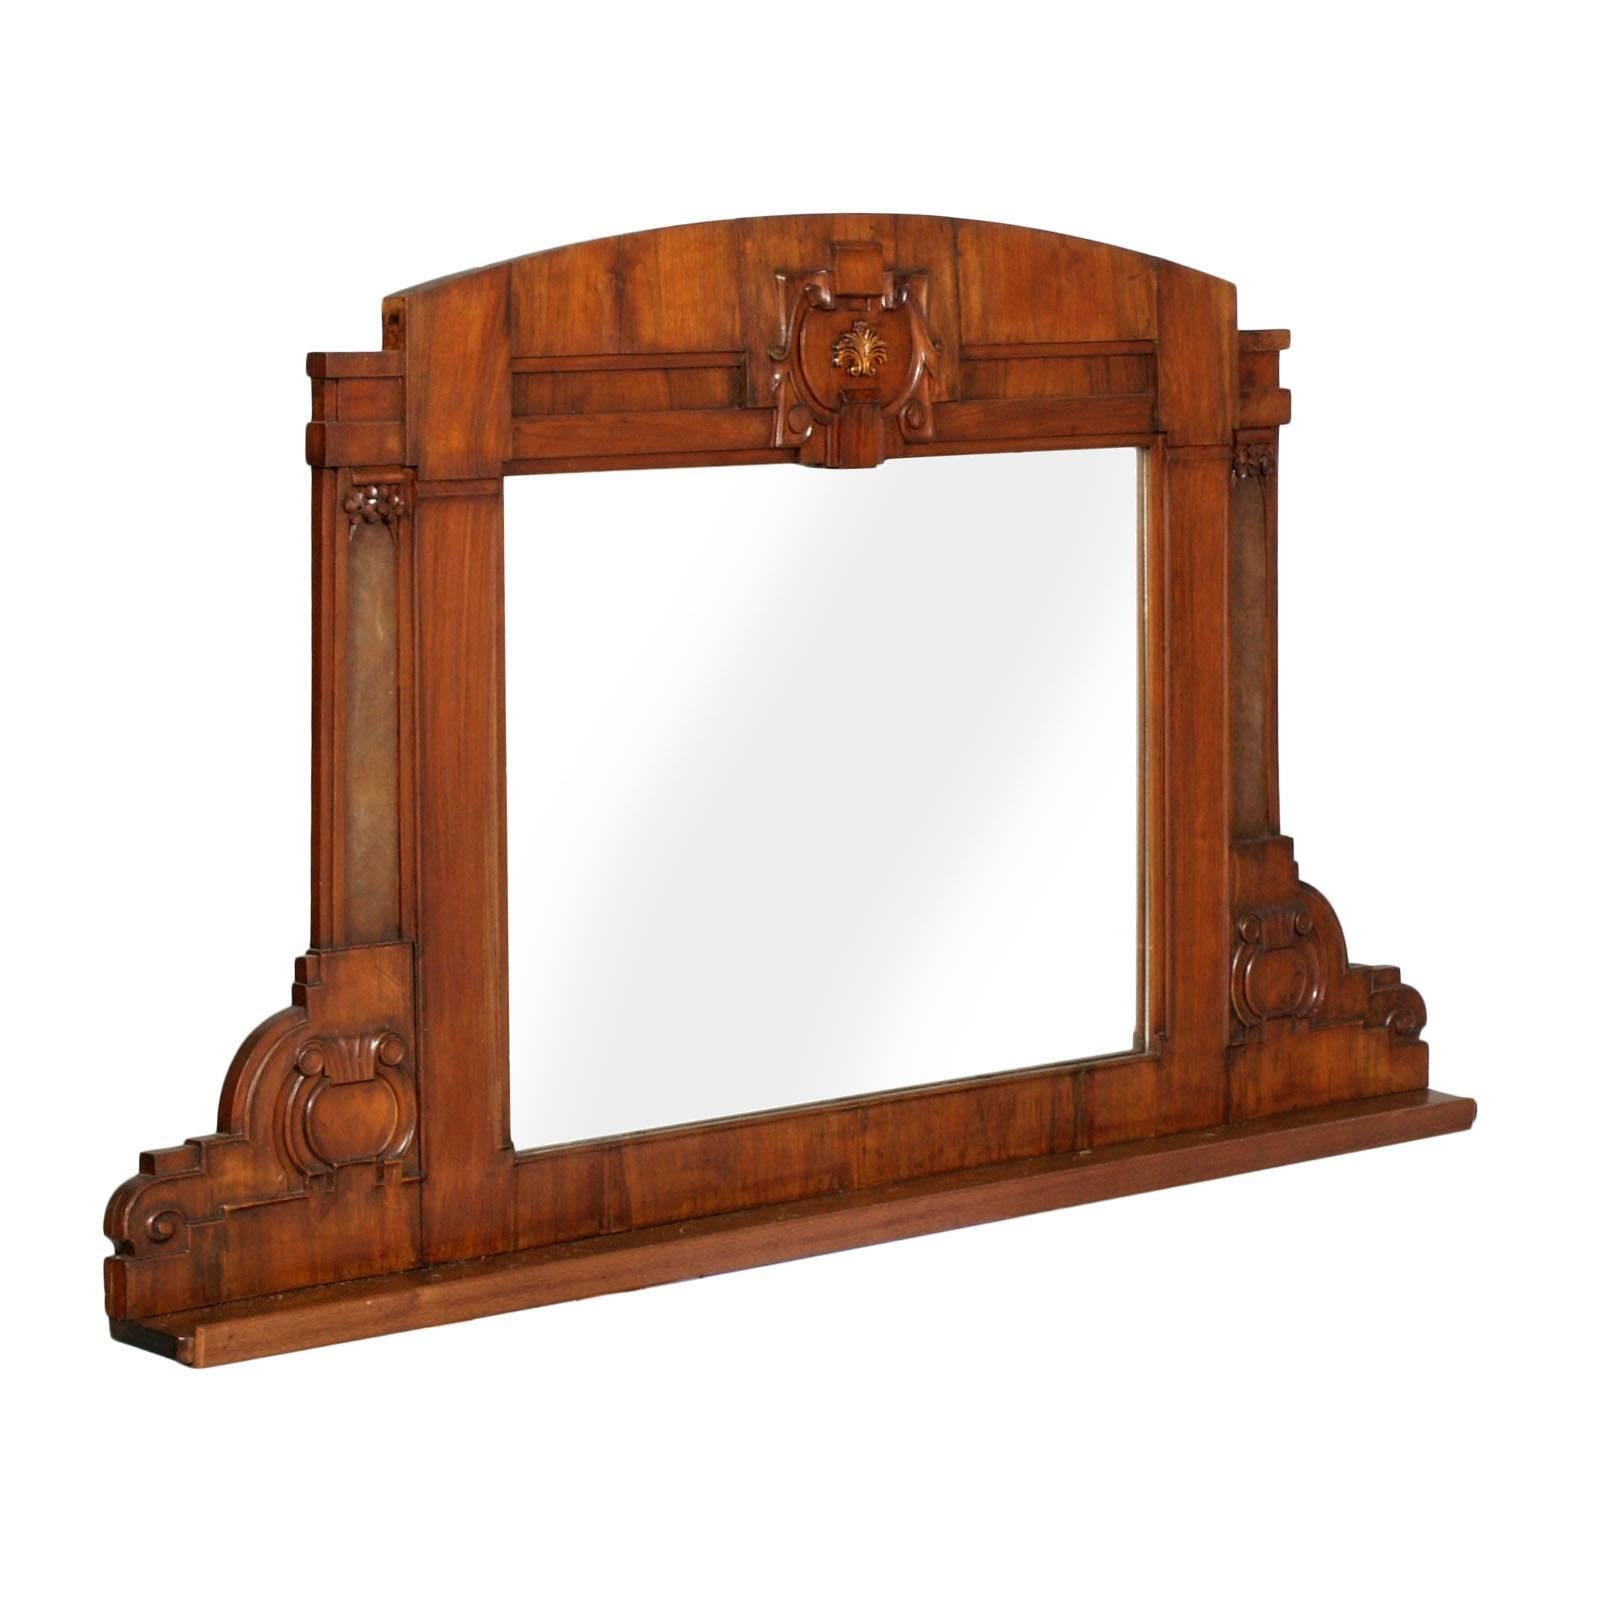 Mid-19th Century Neoclassic Wall Mirror or Fireplace, Hand-Carved Walnut